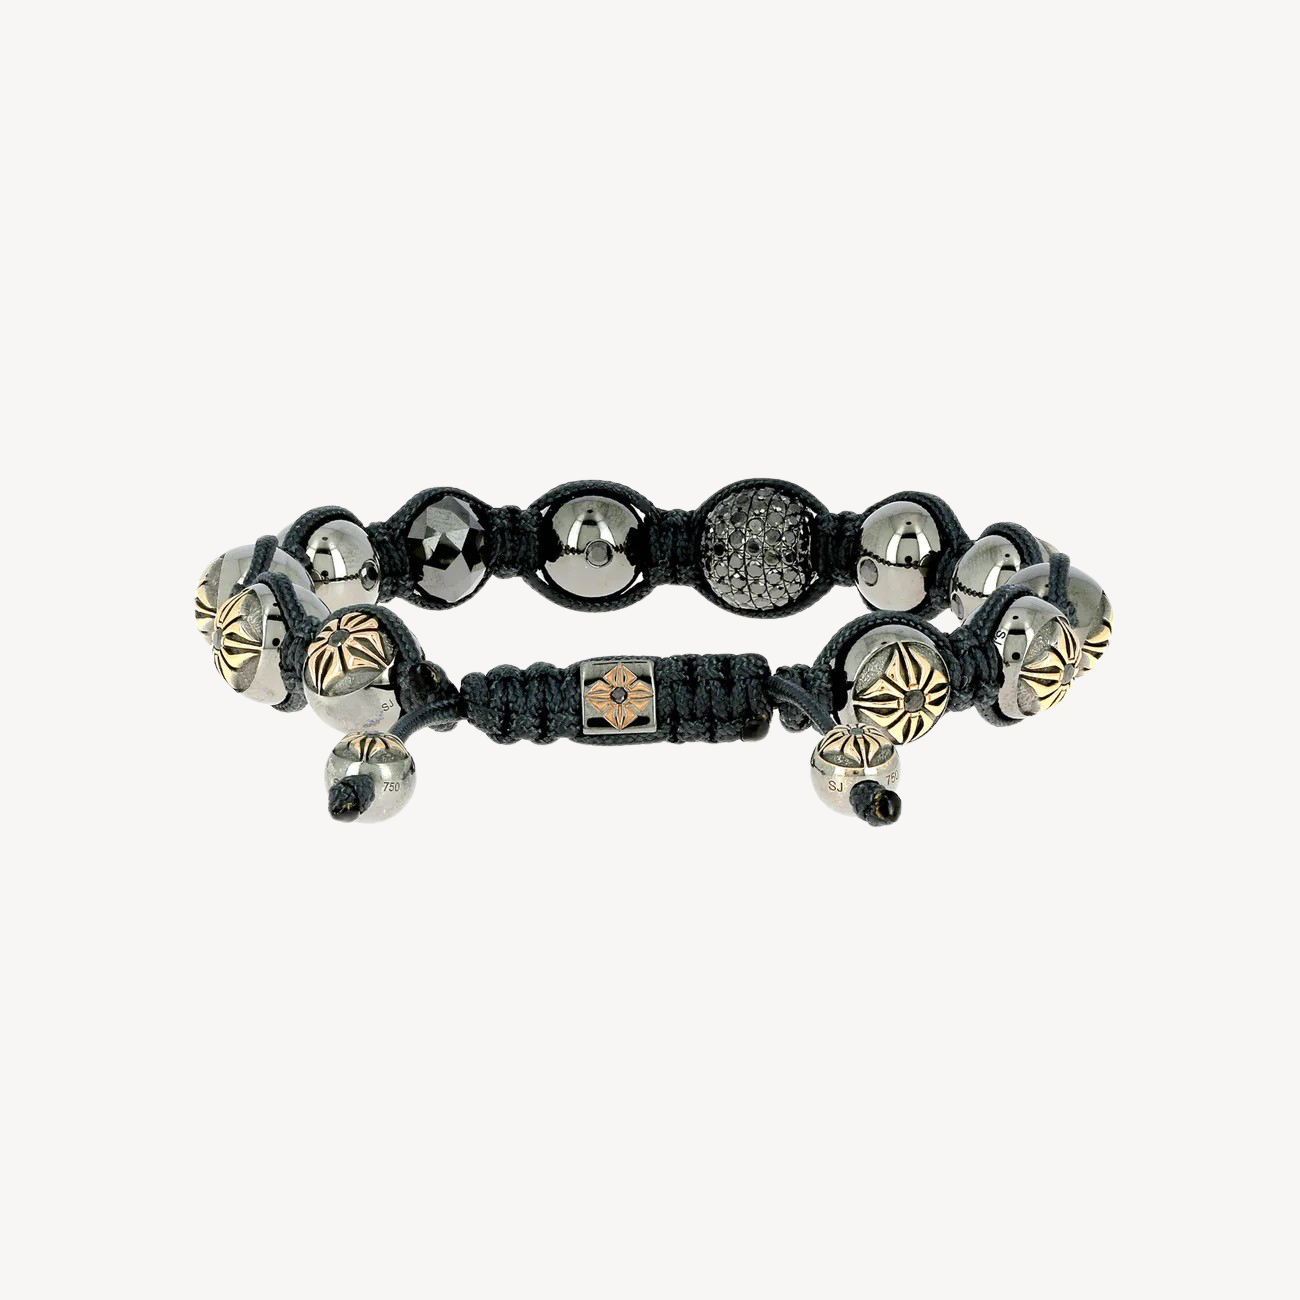 Faceted and Pave Black Diamond Bracelet